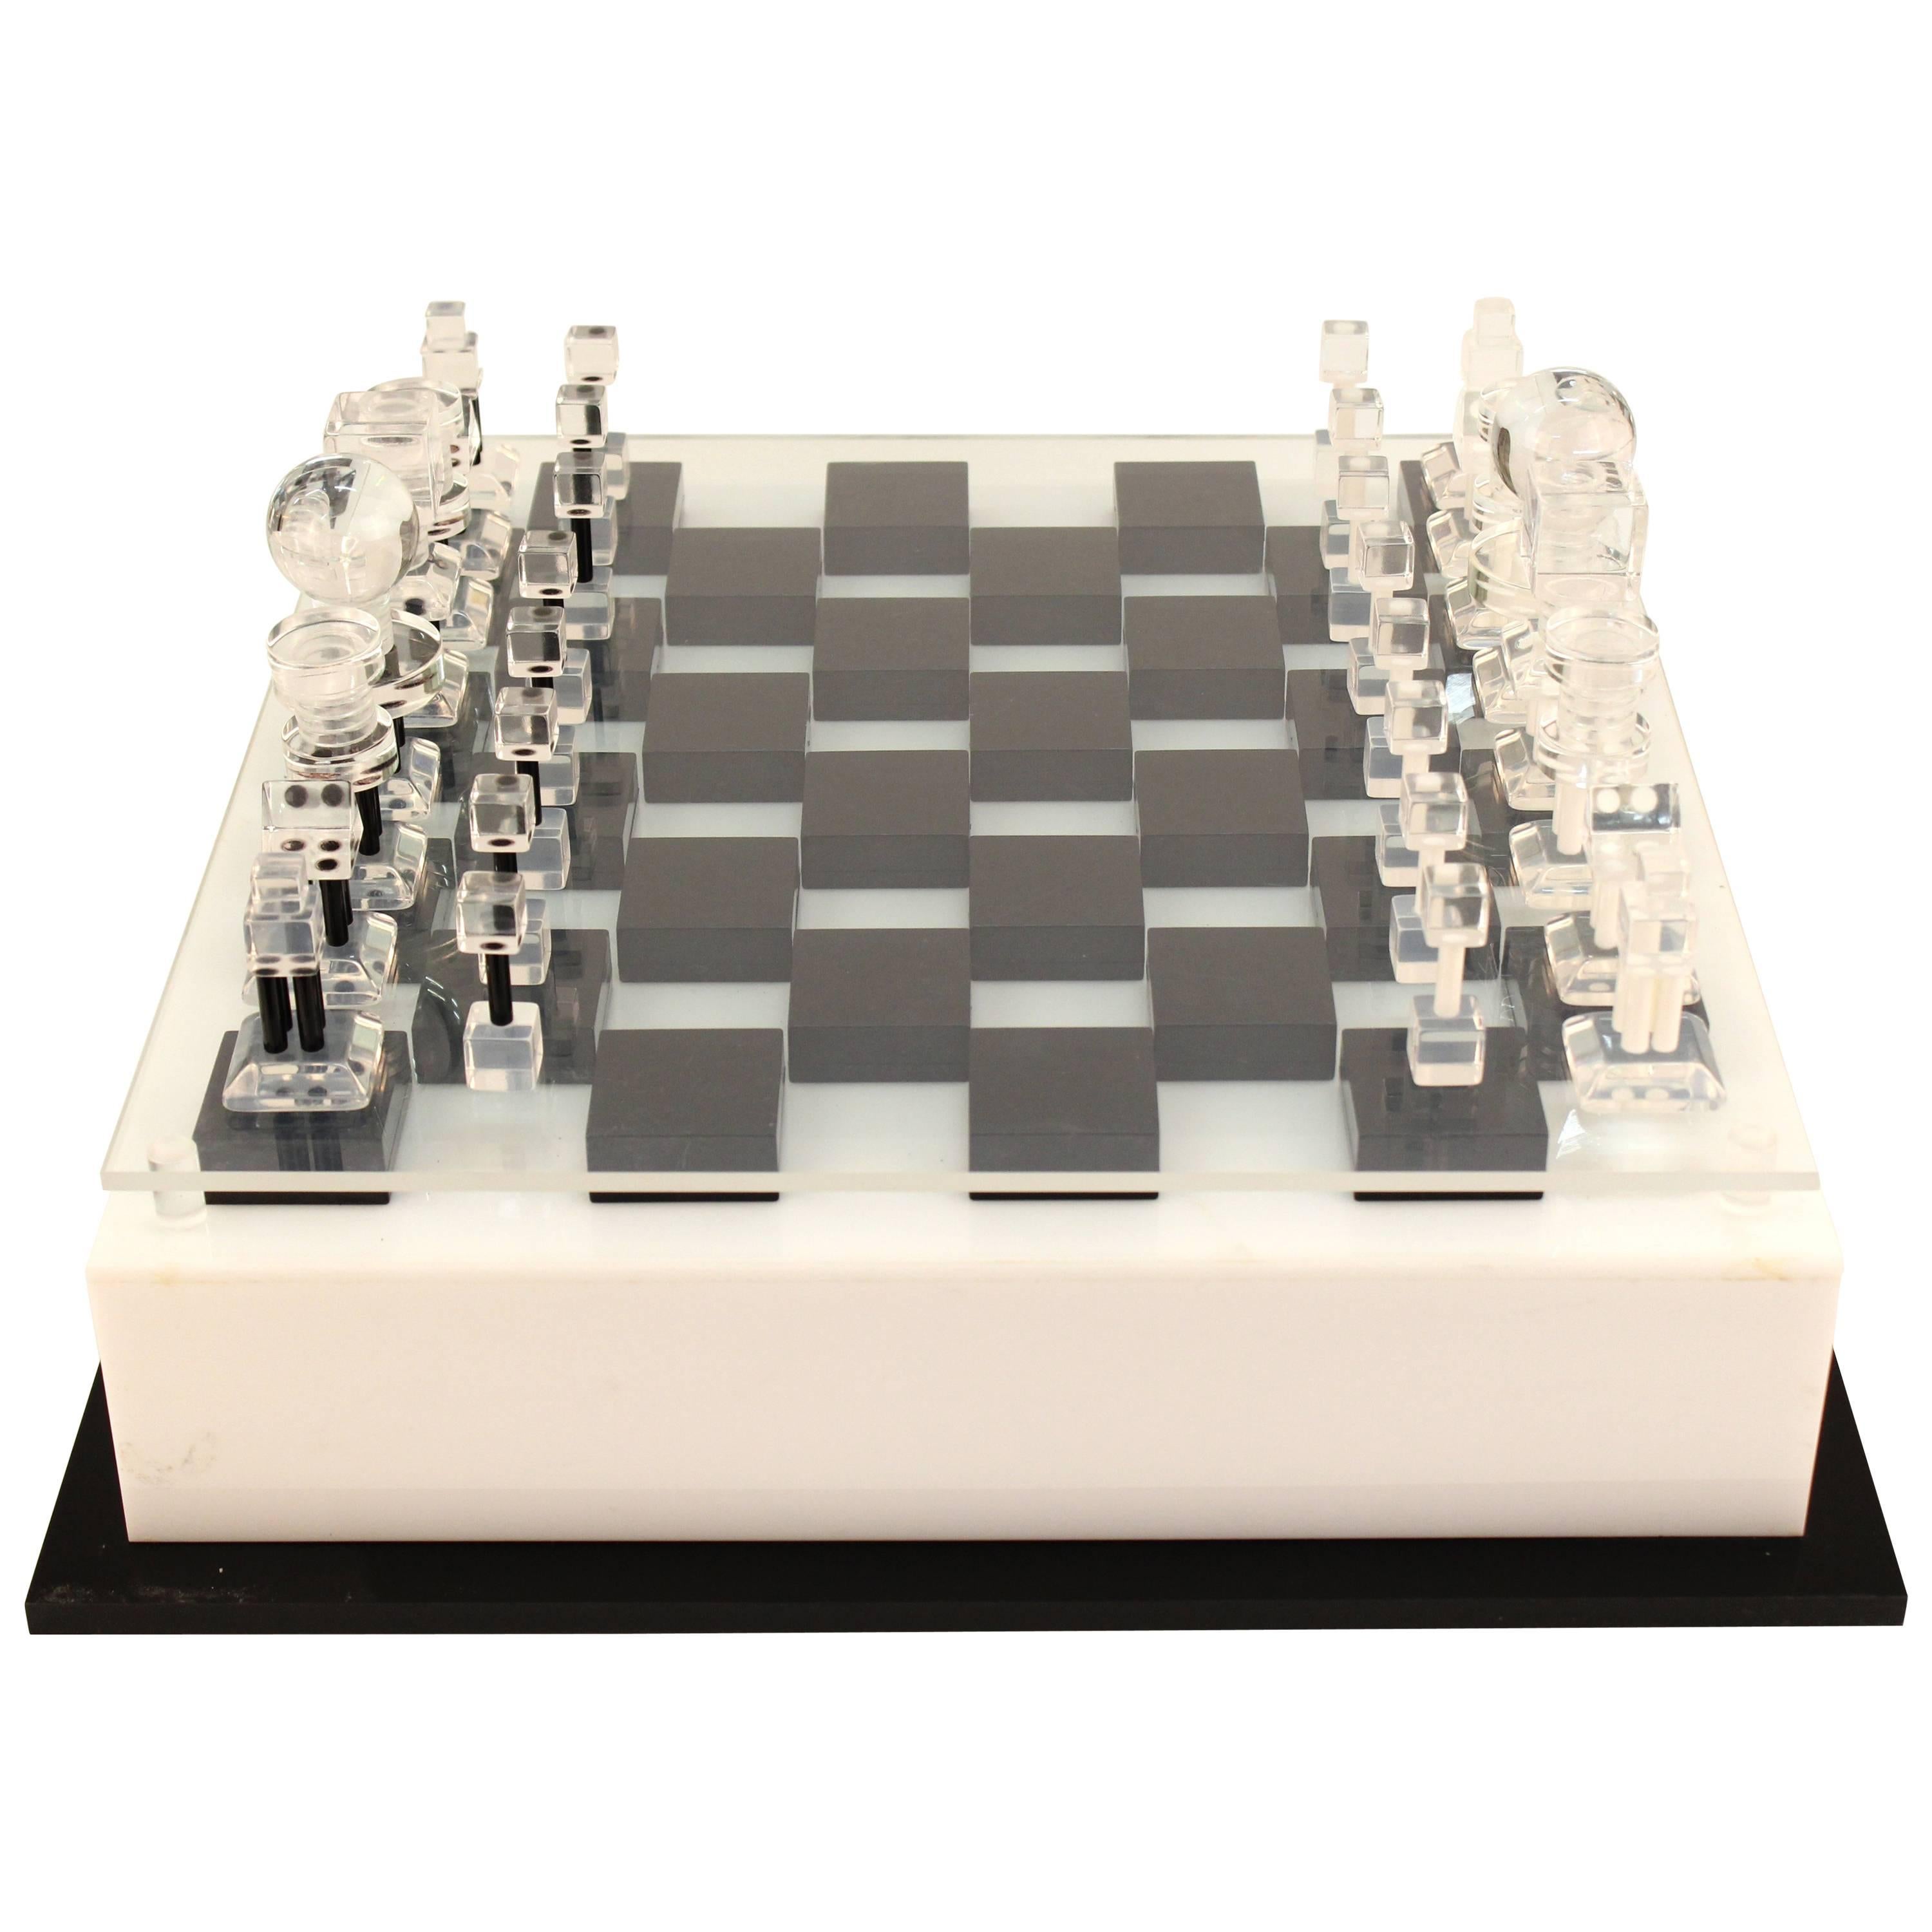 Large Mid-Century Modern Lucite Chess Set with Elaborate Chess Pieces